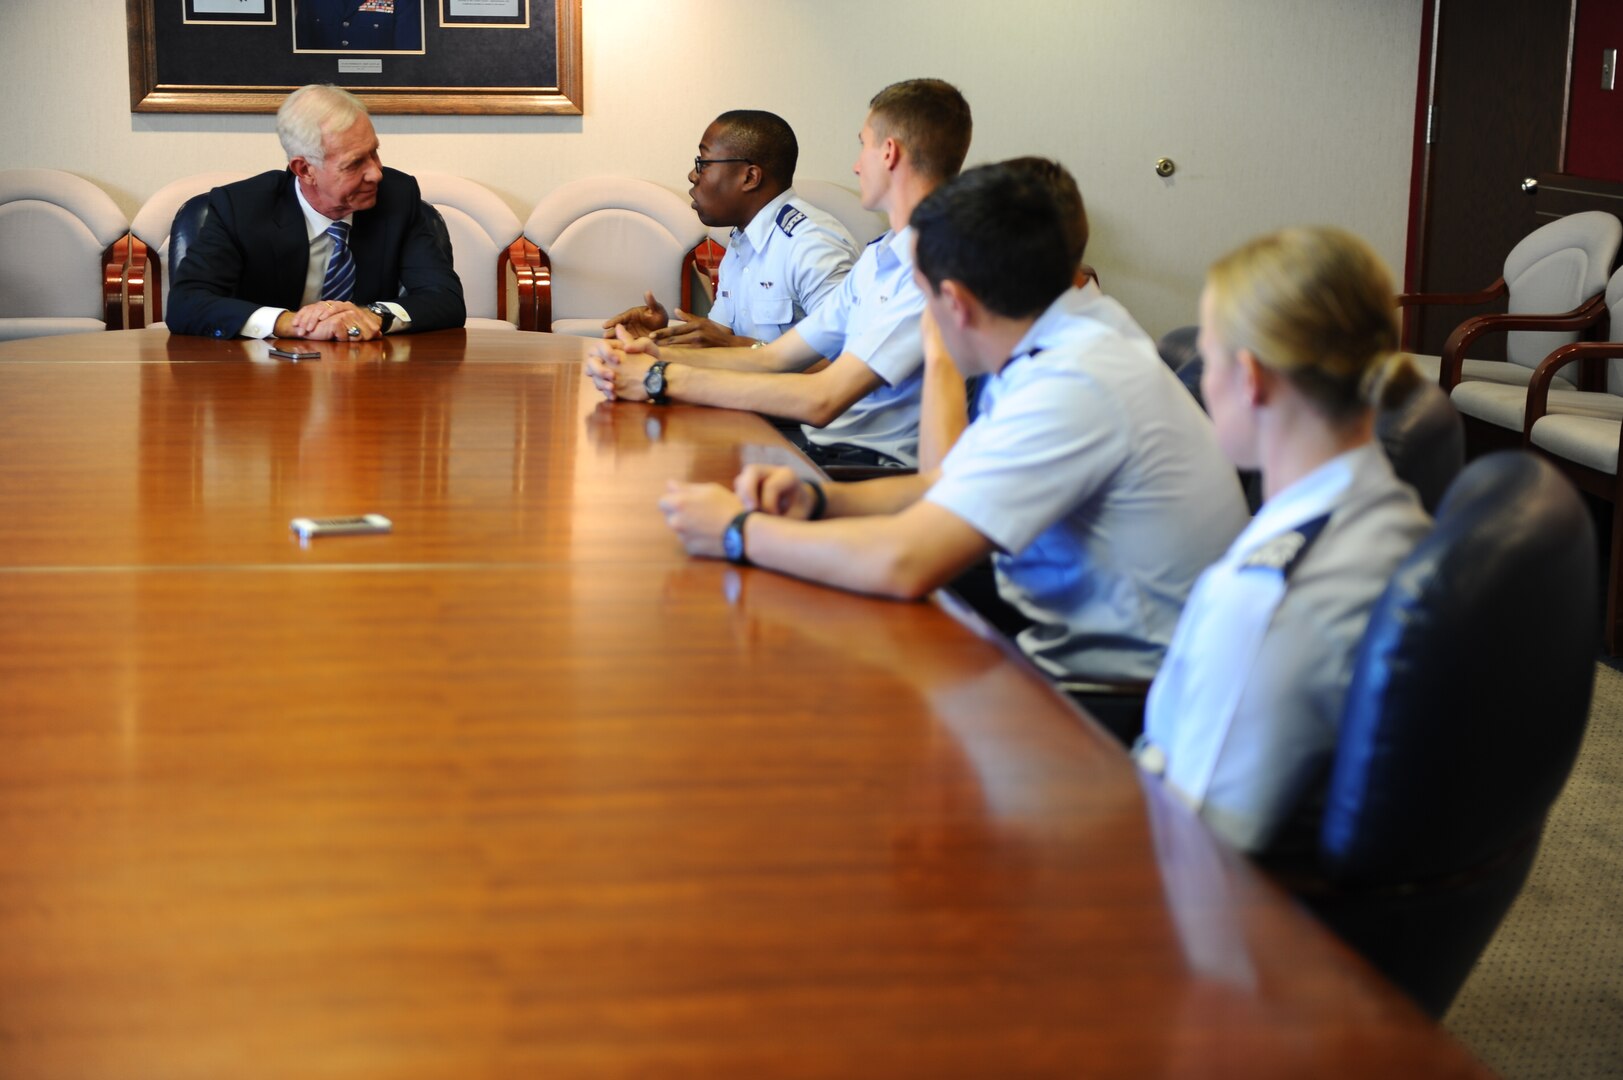 Chelsey "Sully" Sullenberger, who saved 155 lives on Flight 1549 after a heroic emergency landing on the Hudson River in 2009, visits with cadets here Oct. 20, 2014. (U.S. Air Force photo/Amber Baillie)